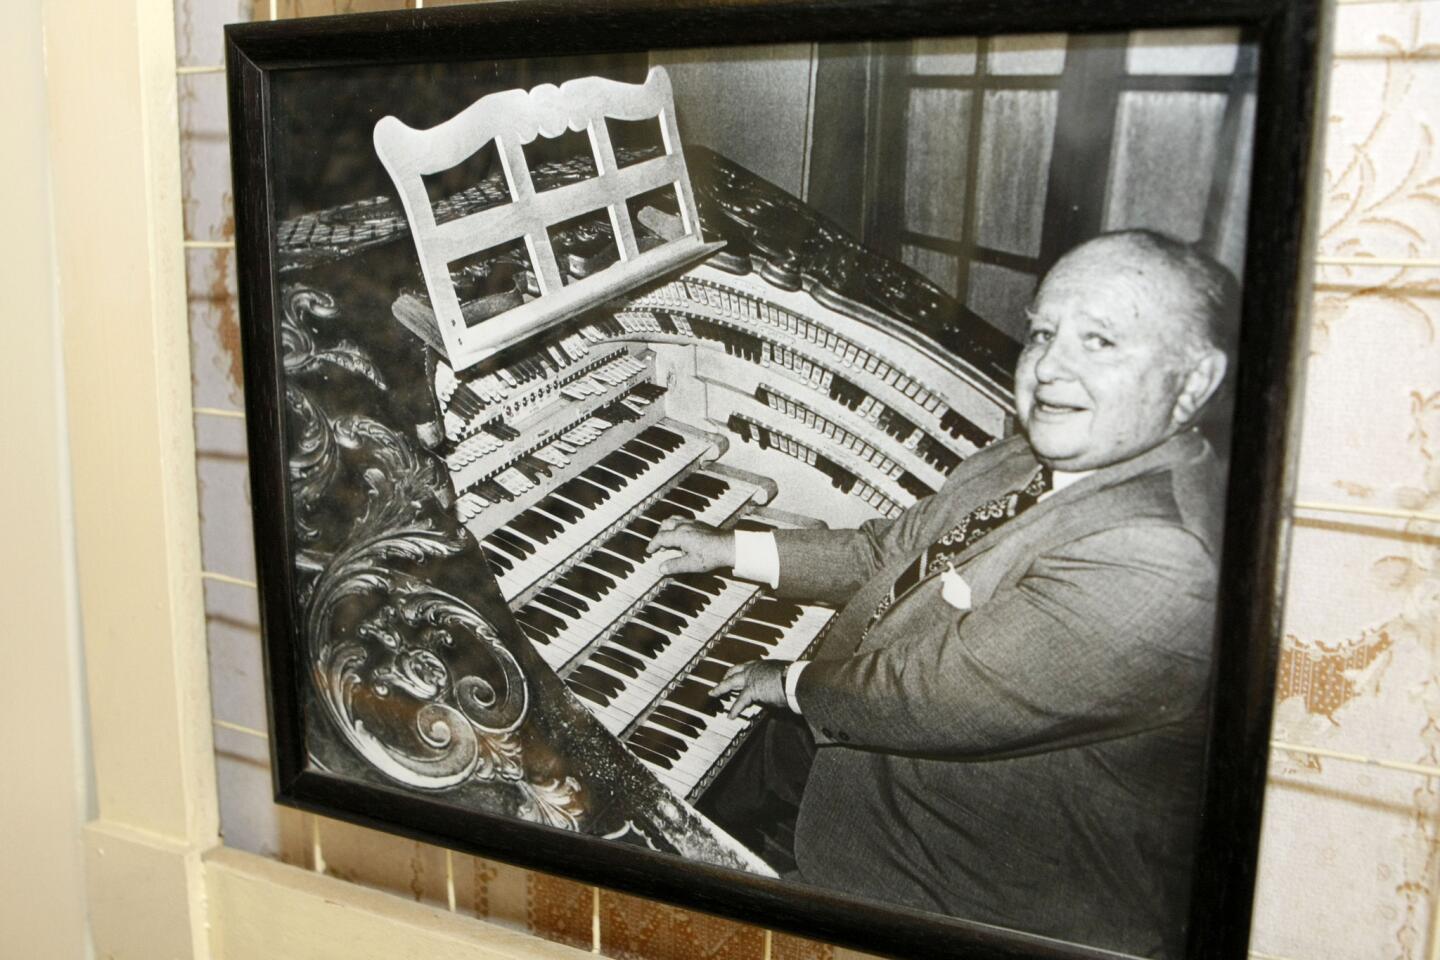 A photo of Frank Lanterman while he played the organ is displayed at the new exhibit "The Legacy of Frank Lanterman 1901-1981" at the Lanterman House in La Cañada Flintridge on Tuesday, Feb. 14, 2017.